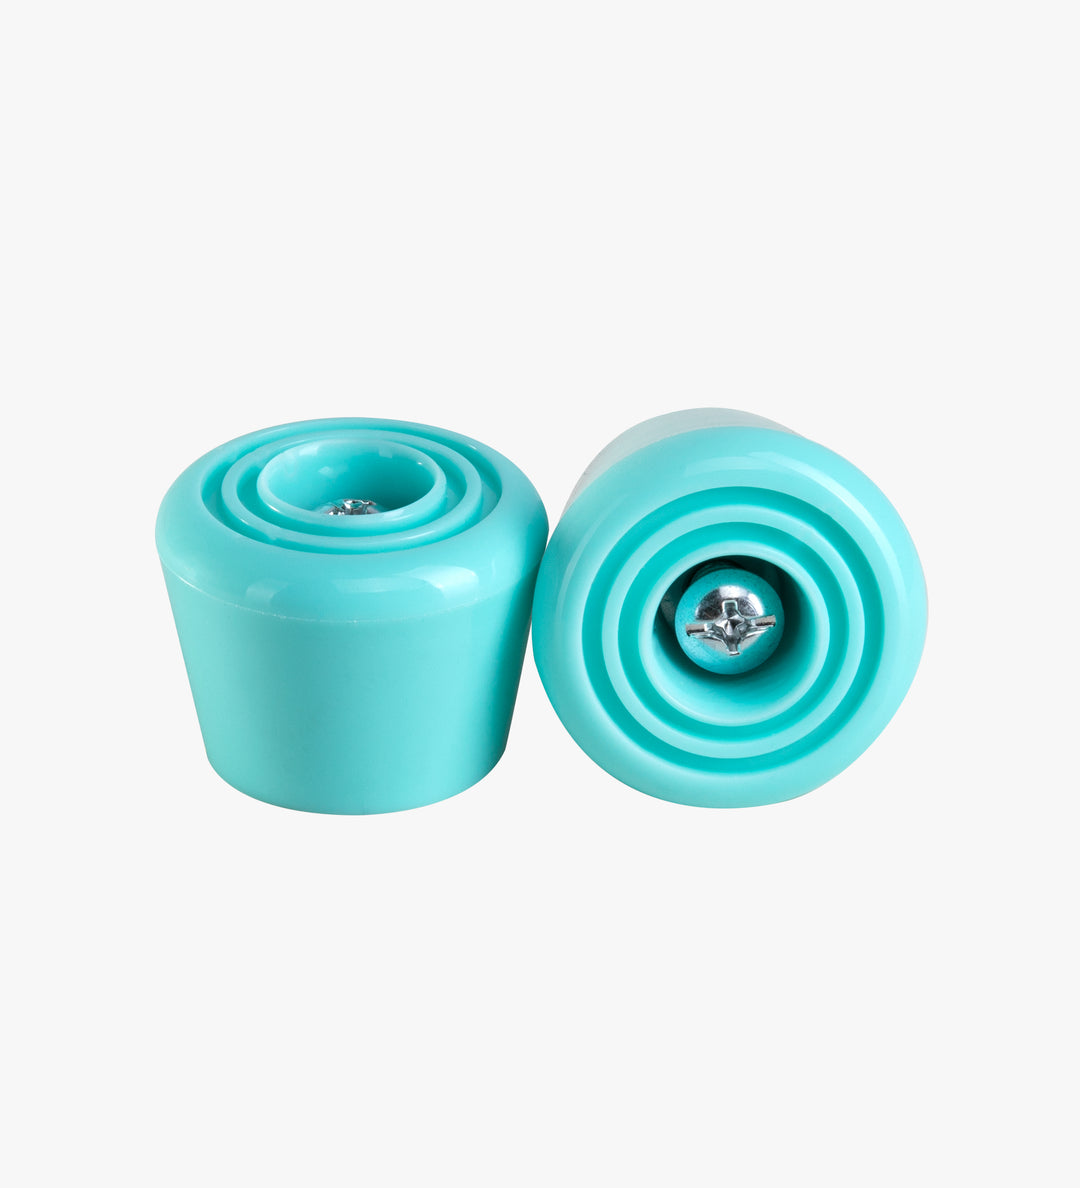 Aqua C7 roller skate stoppers made from durable polyurethane PU82A dimensions are 47 by 35 mm 